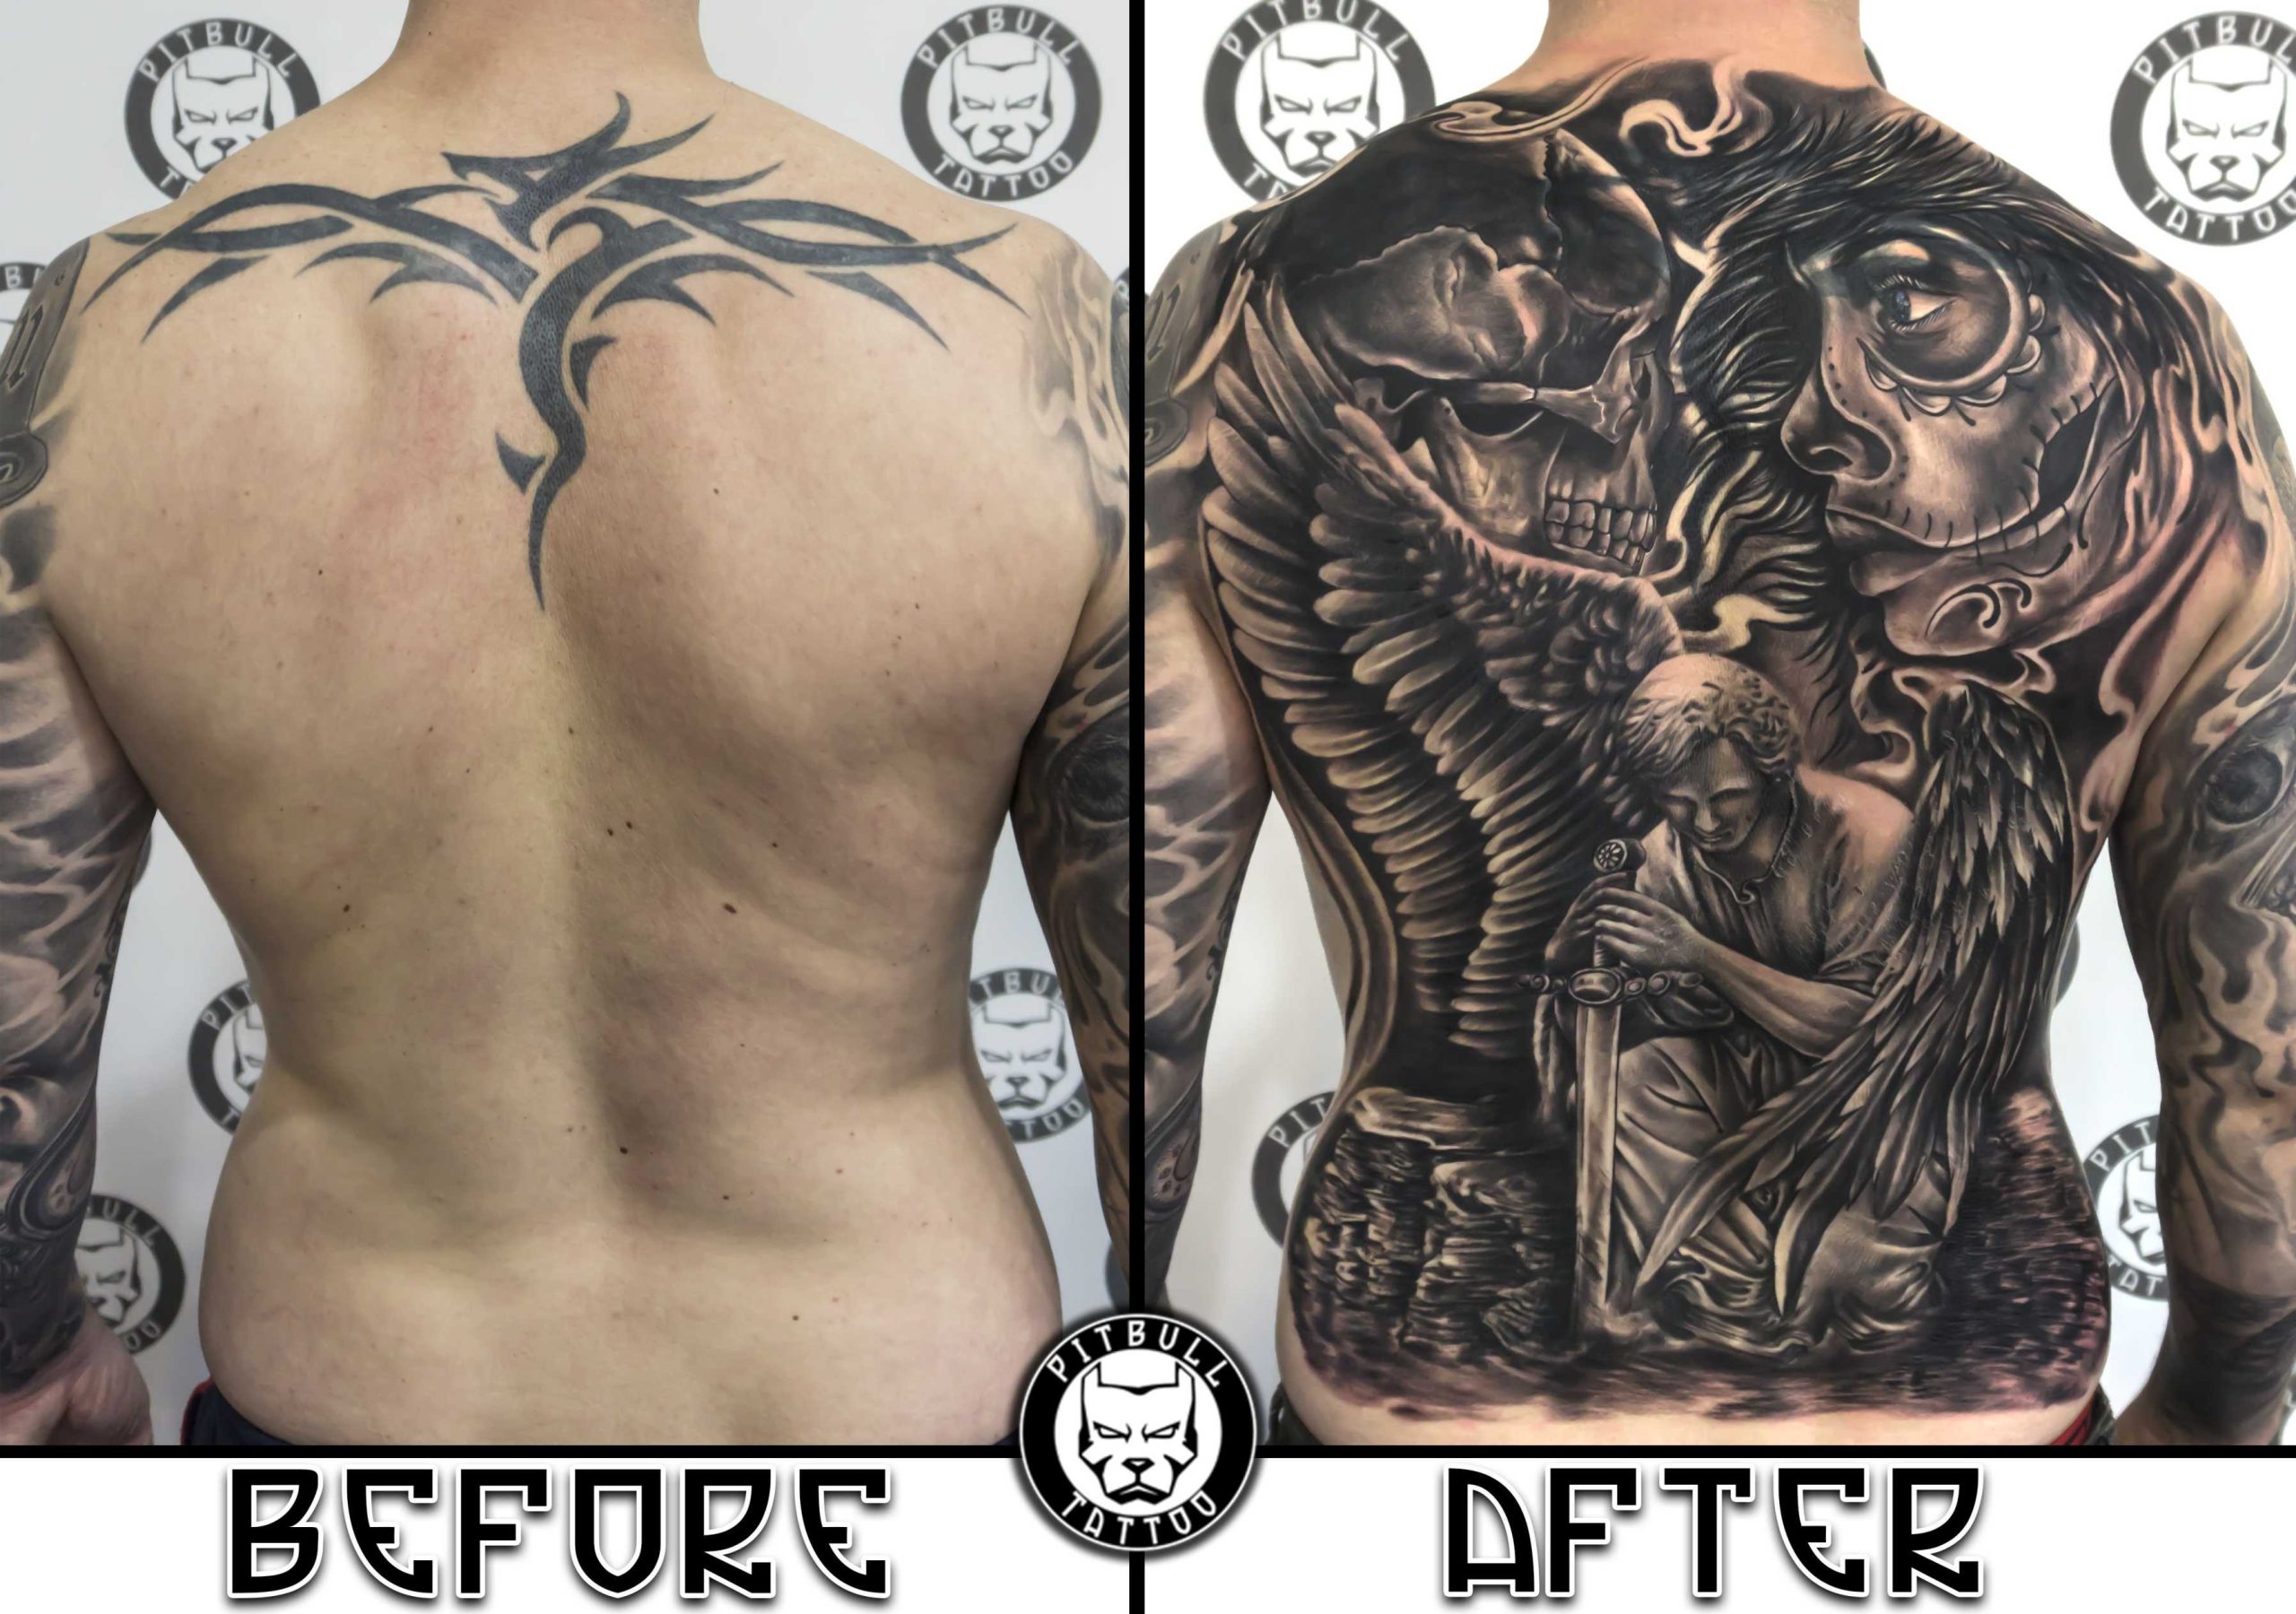 Full back cover up  Cover up tattoos, Cover up back tattoos